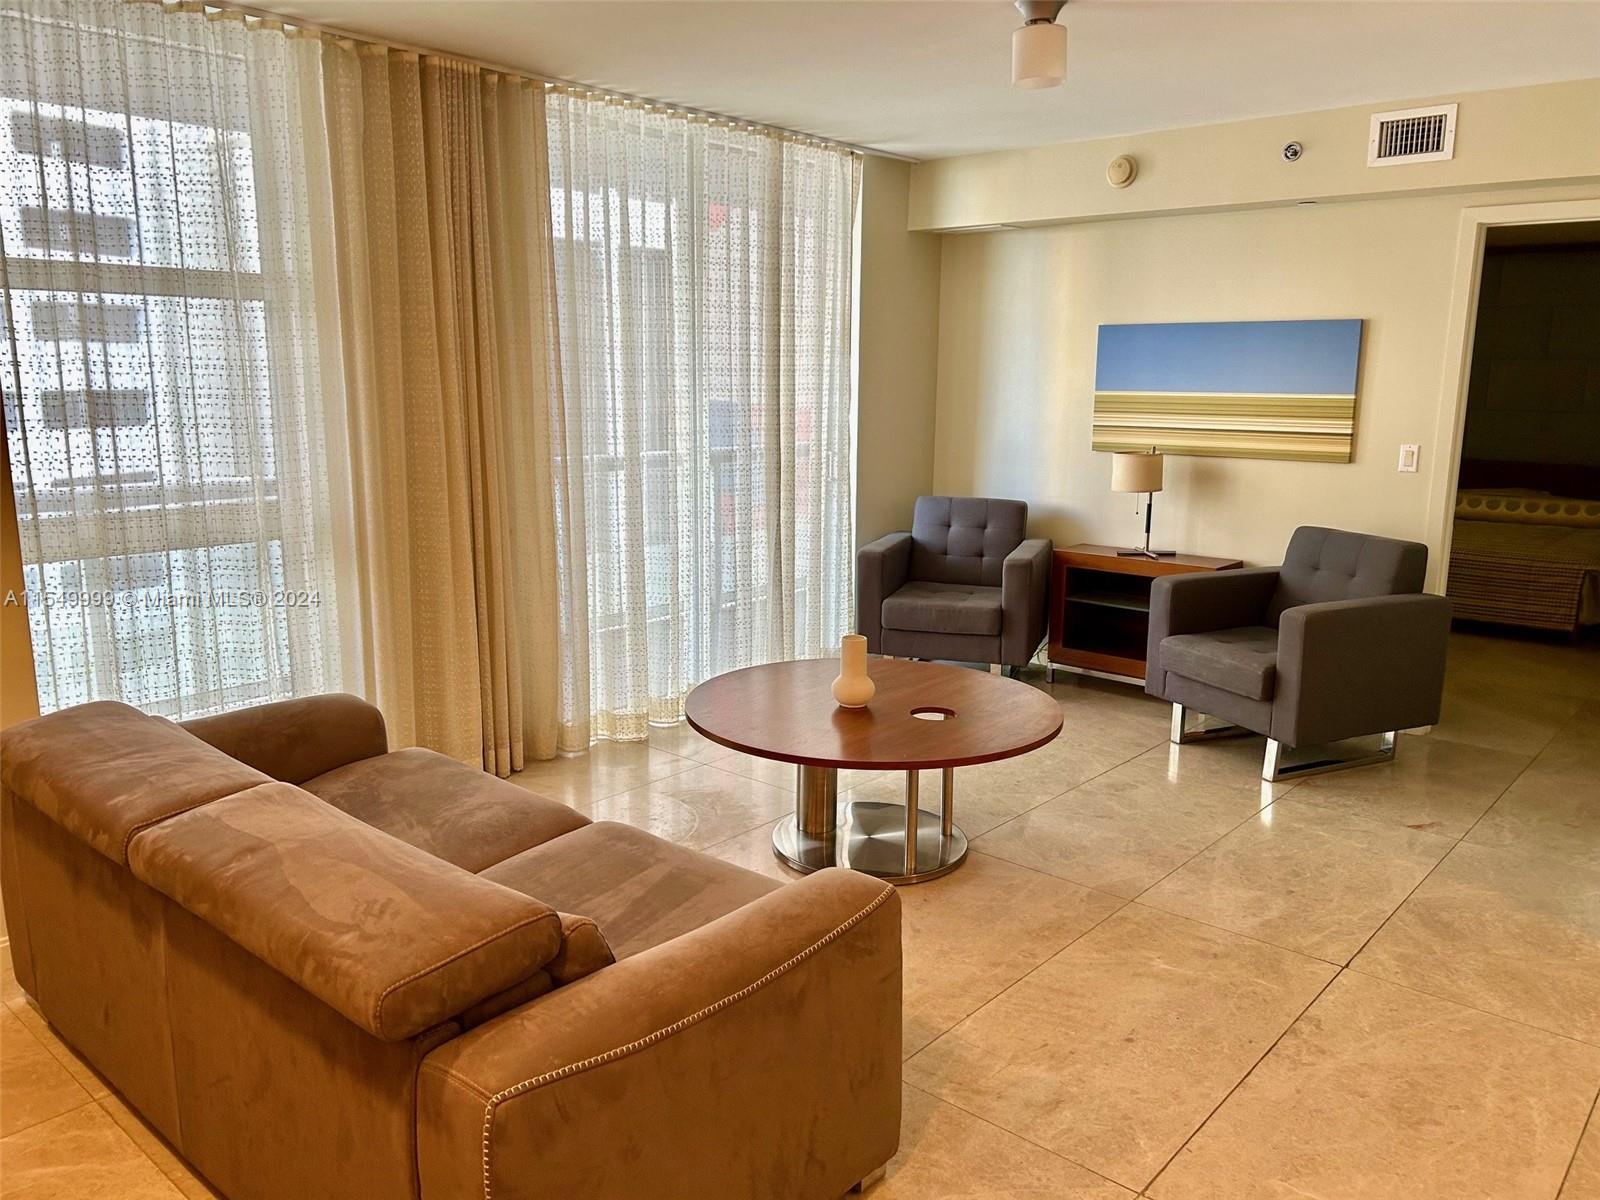 Fully furnished corner Park Suite, one bedroom plus DEN/Family with 2 full bathrooms. 
Completely equipped. Rent includes basic cable & internet, water, free electric car charges and amenities. Parking located on the same floor for additional convenience.